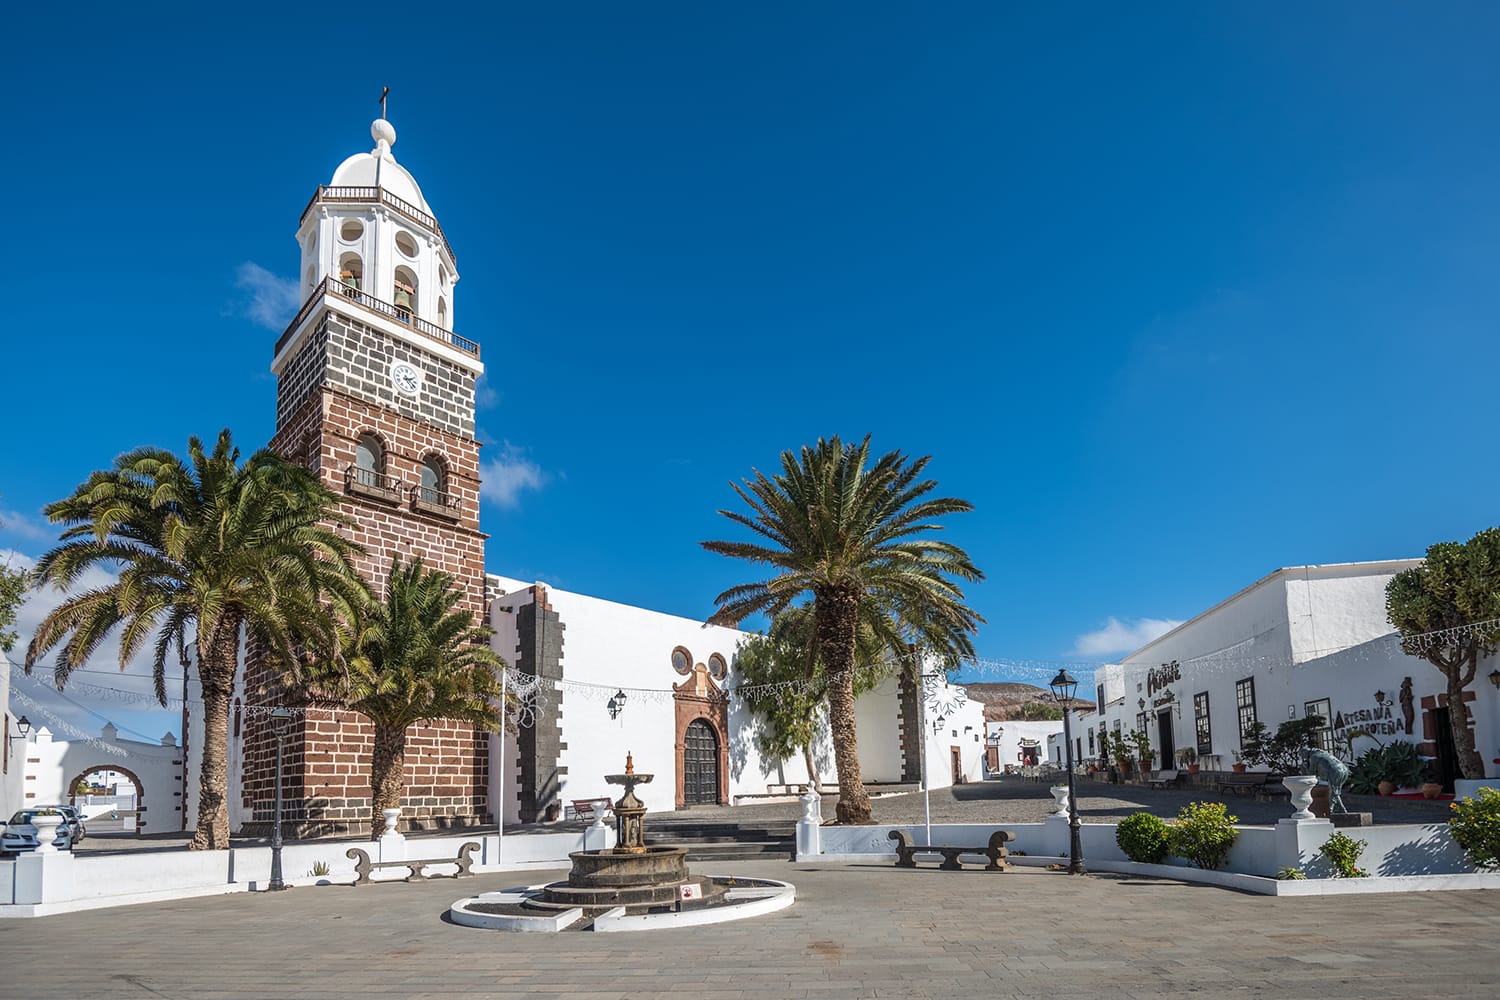 Central square of Teguise town, Lanzarote, Canary Islands, Spain.